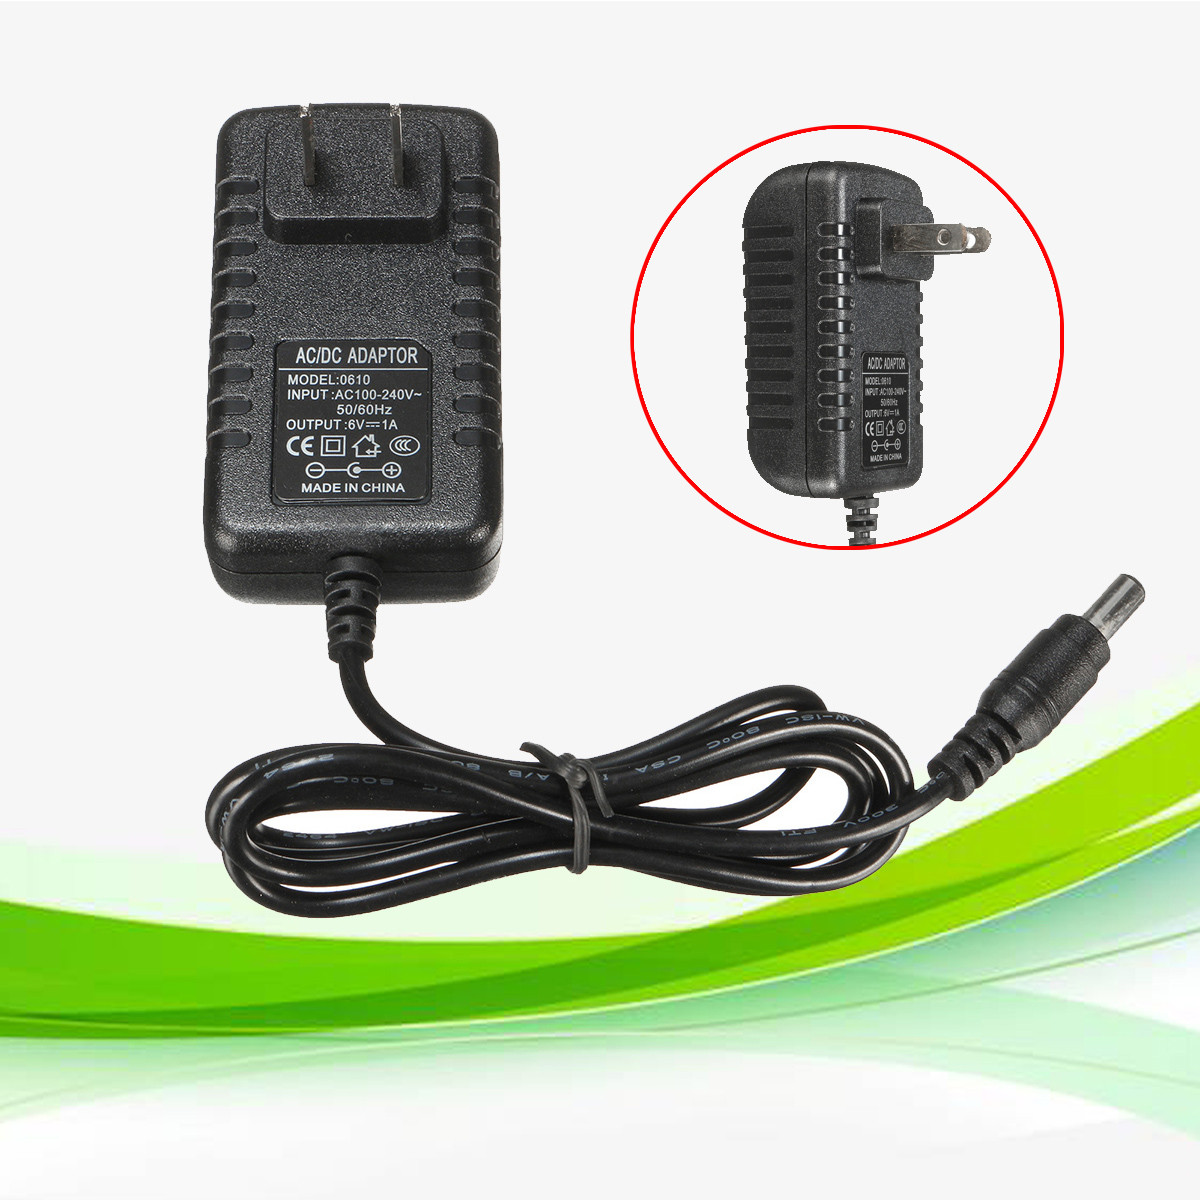 AC-100-240V-TO-DC-6V-1A-Adapter-Power-Supply-Transformer-US-Plug-Battery-Charger-1103549-1